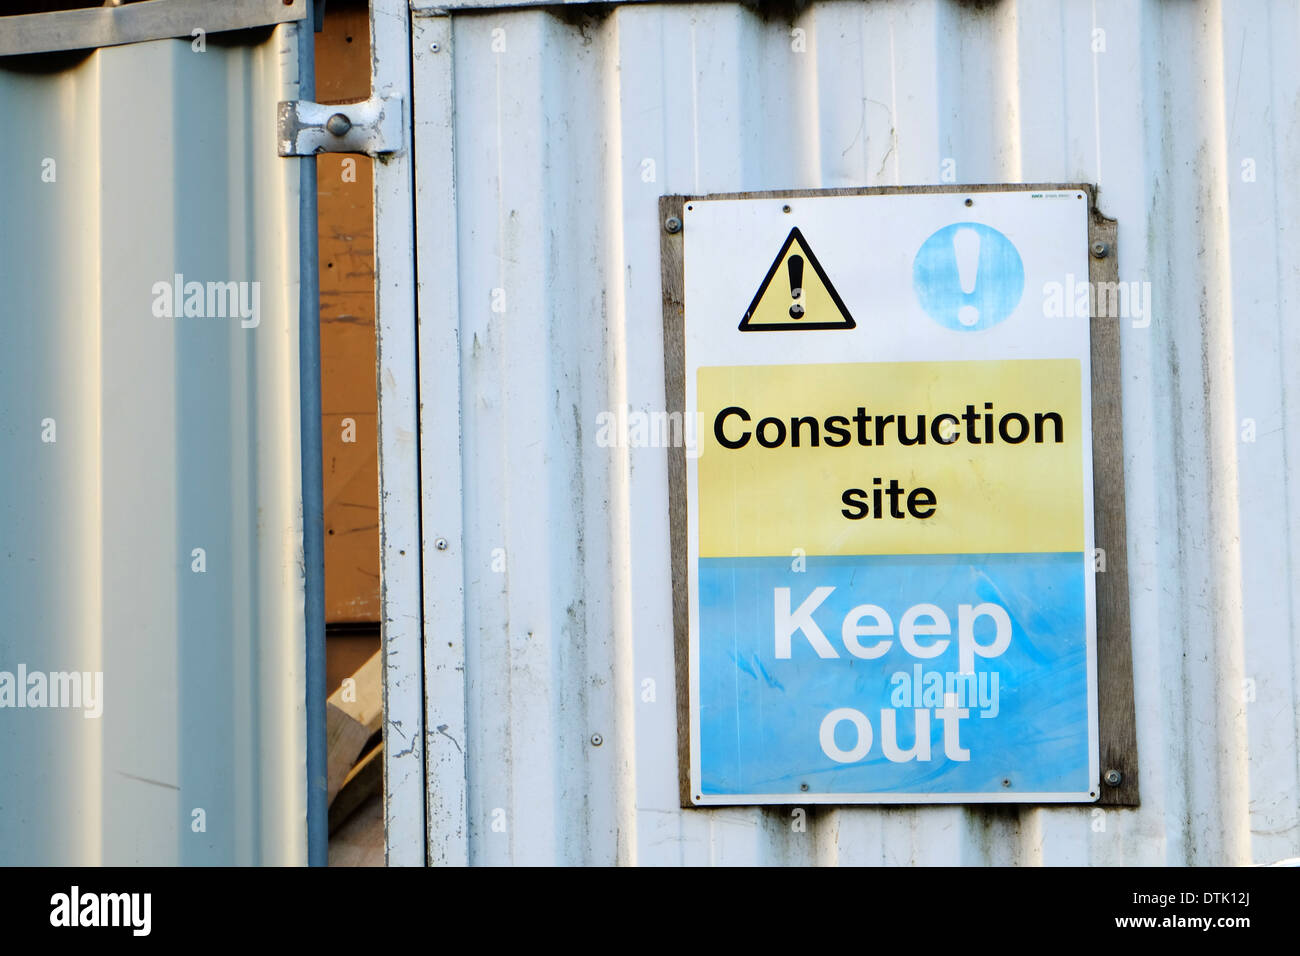 Construction site, Keep out sign Stock Photo